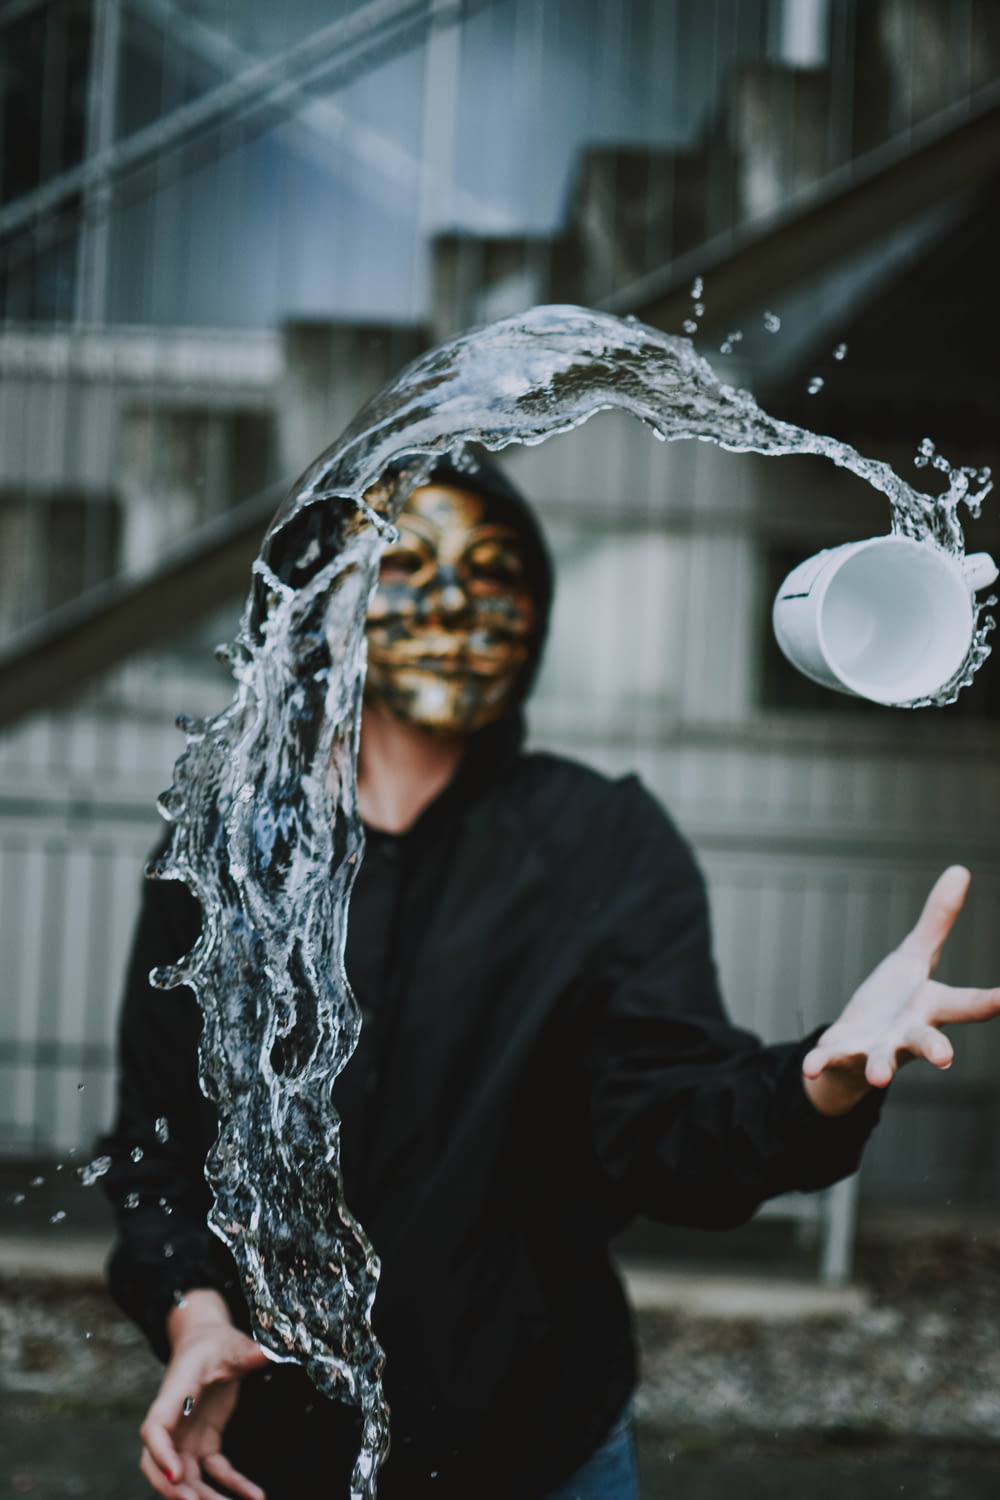 person with mask throwing mug with water